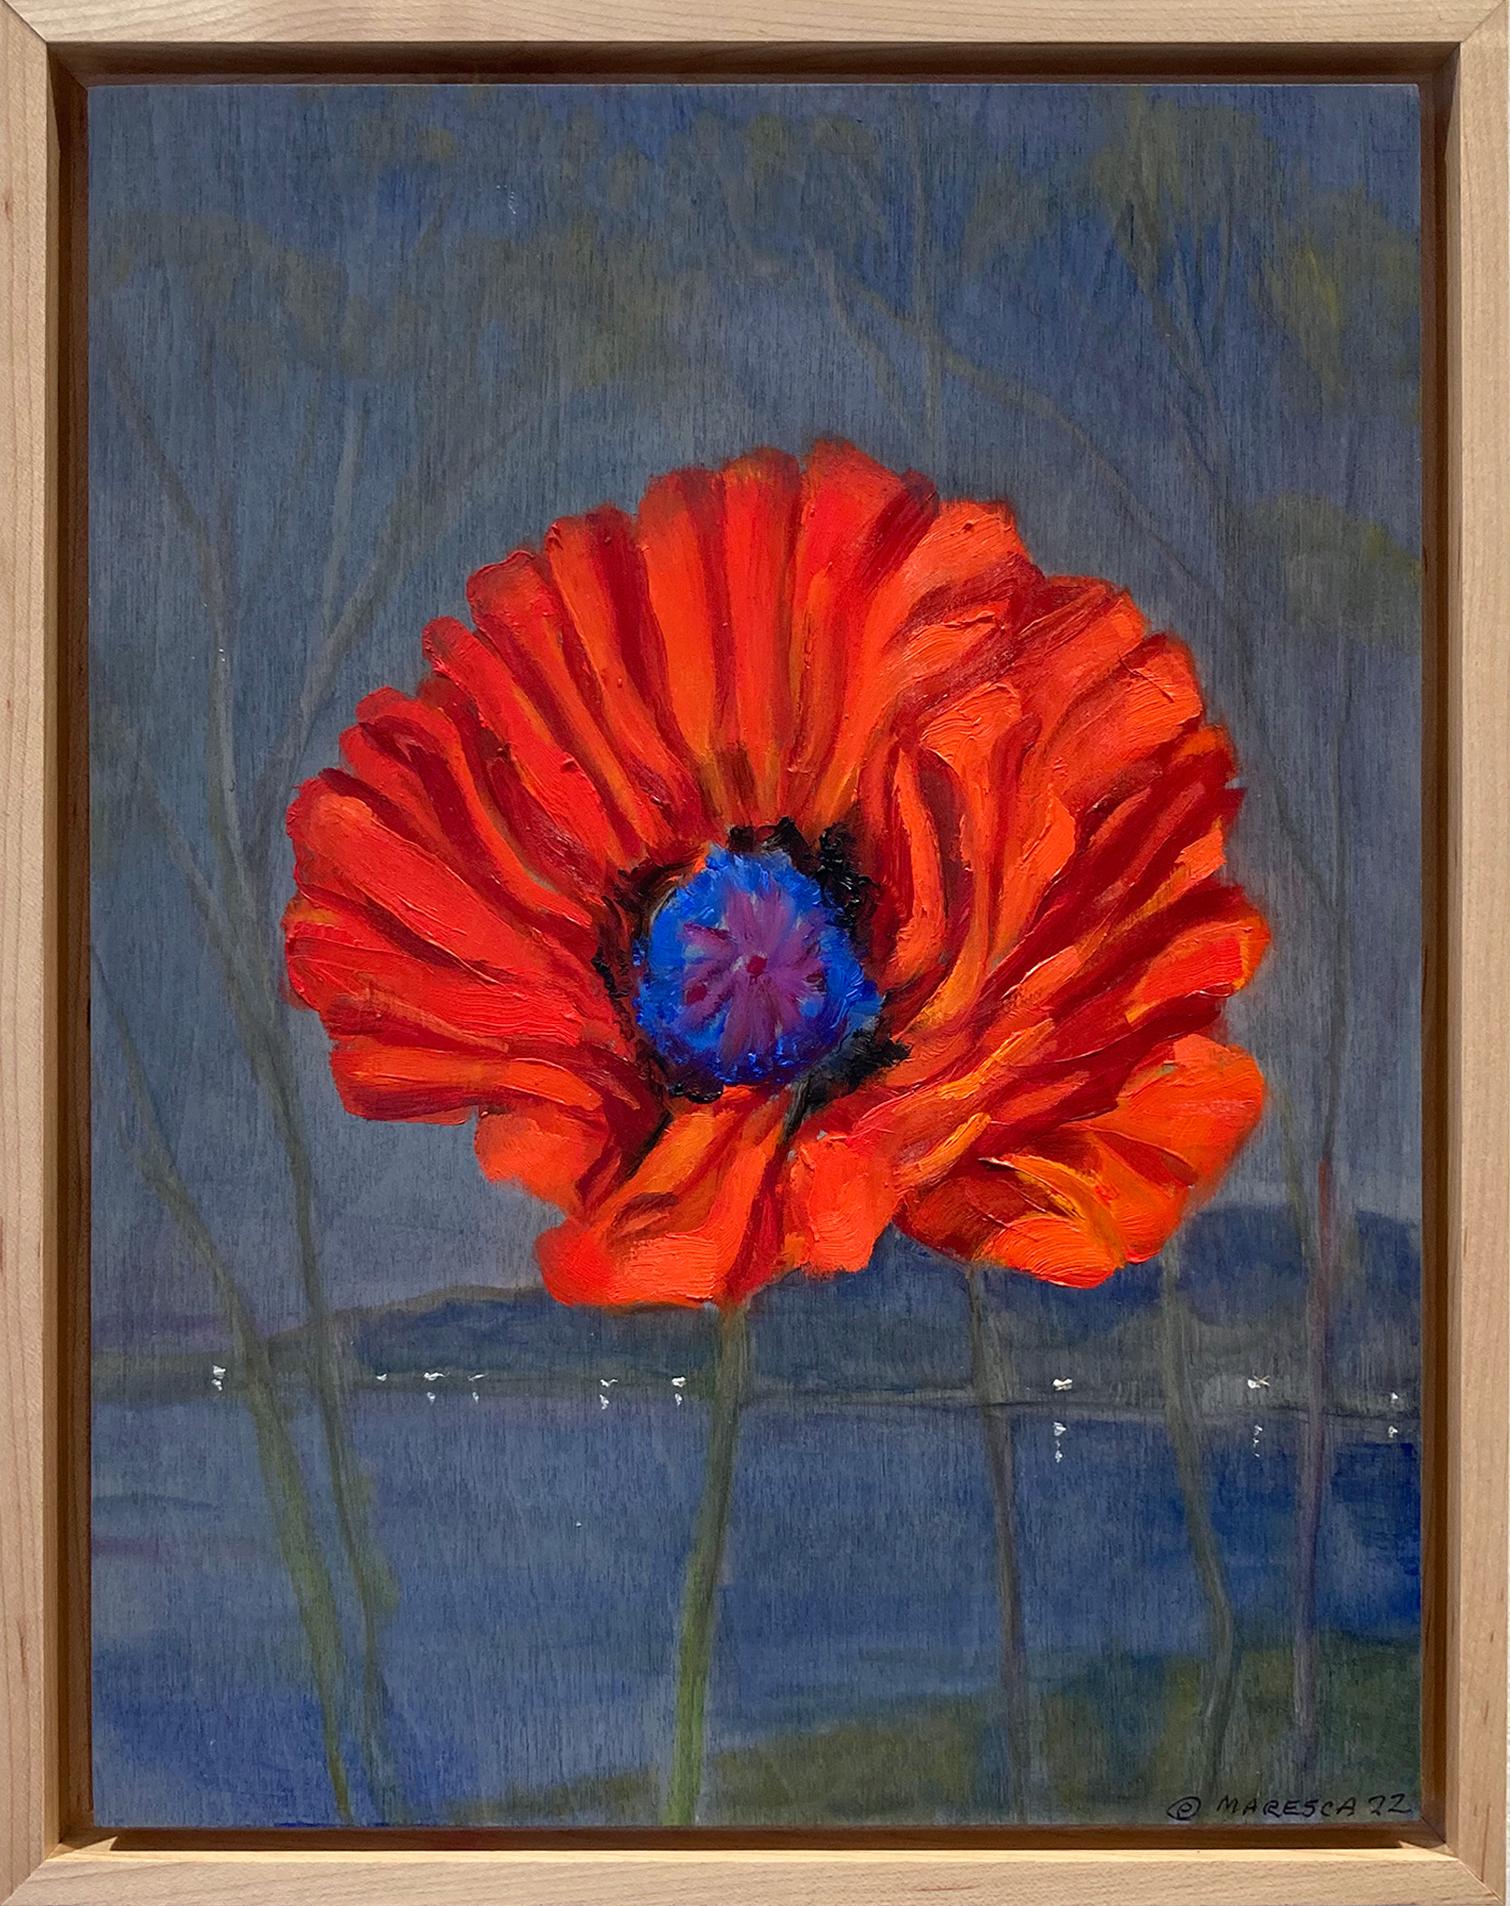 Joseph Maresca Landscape Painting - Winter Poppy (Still Life Painting of a Red Poppy and Blue Landscape) 